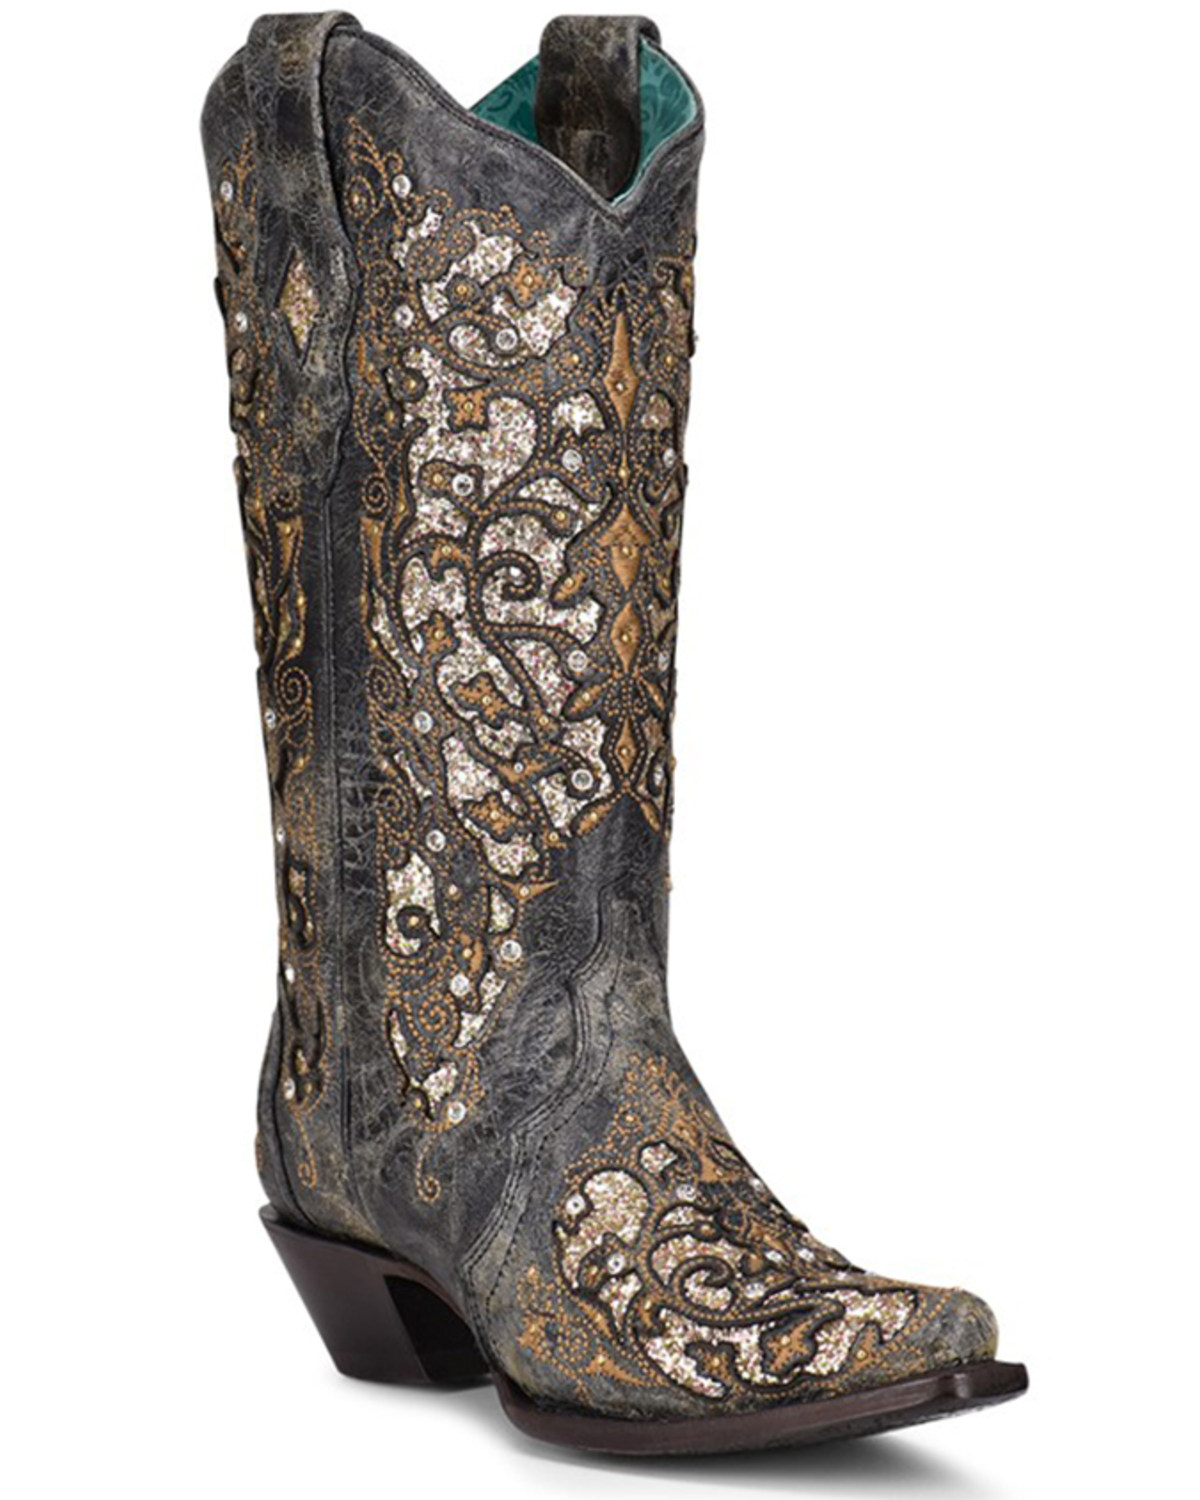 Corral Women's Inlay & Studs Western Boots - Snip Toe